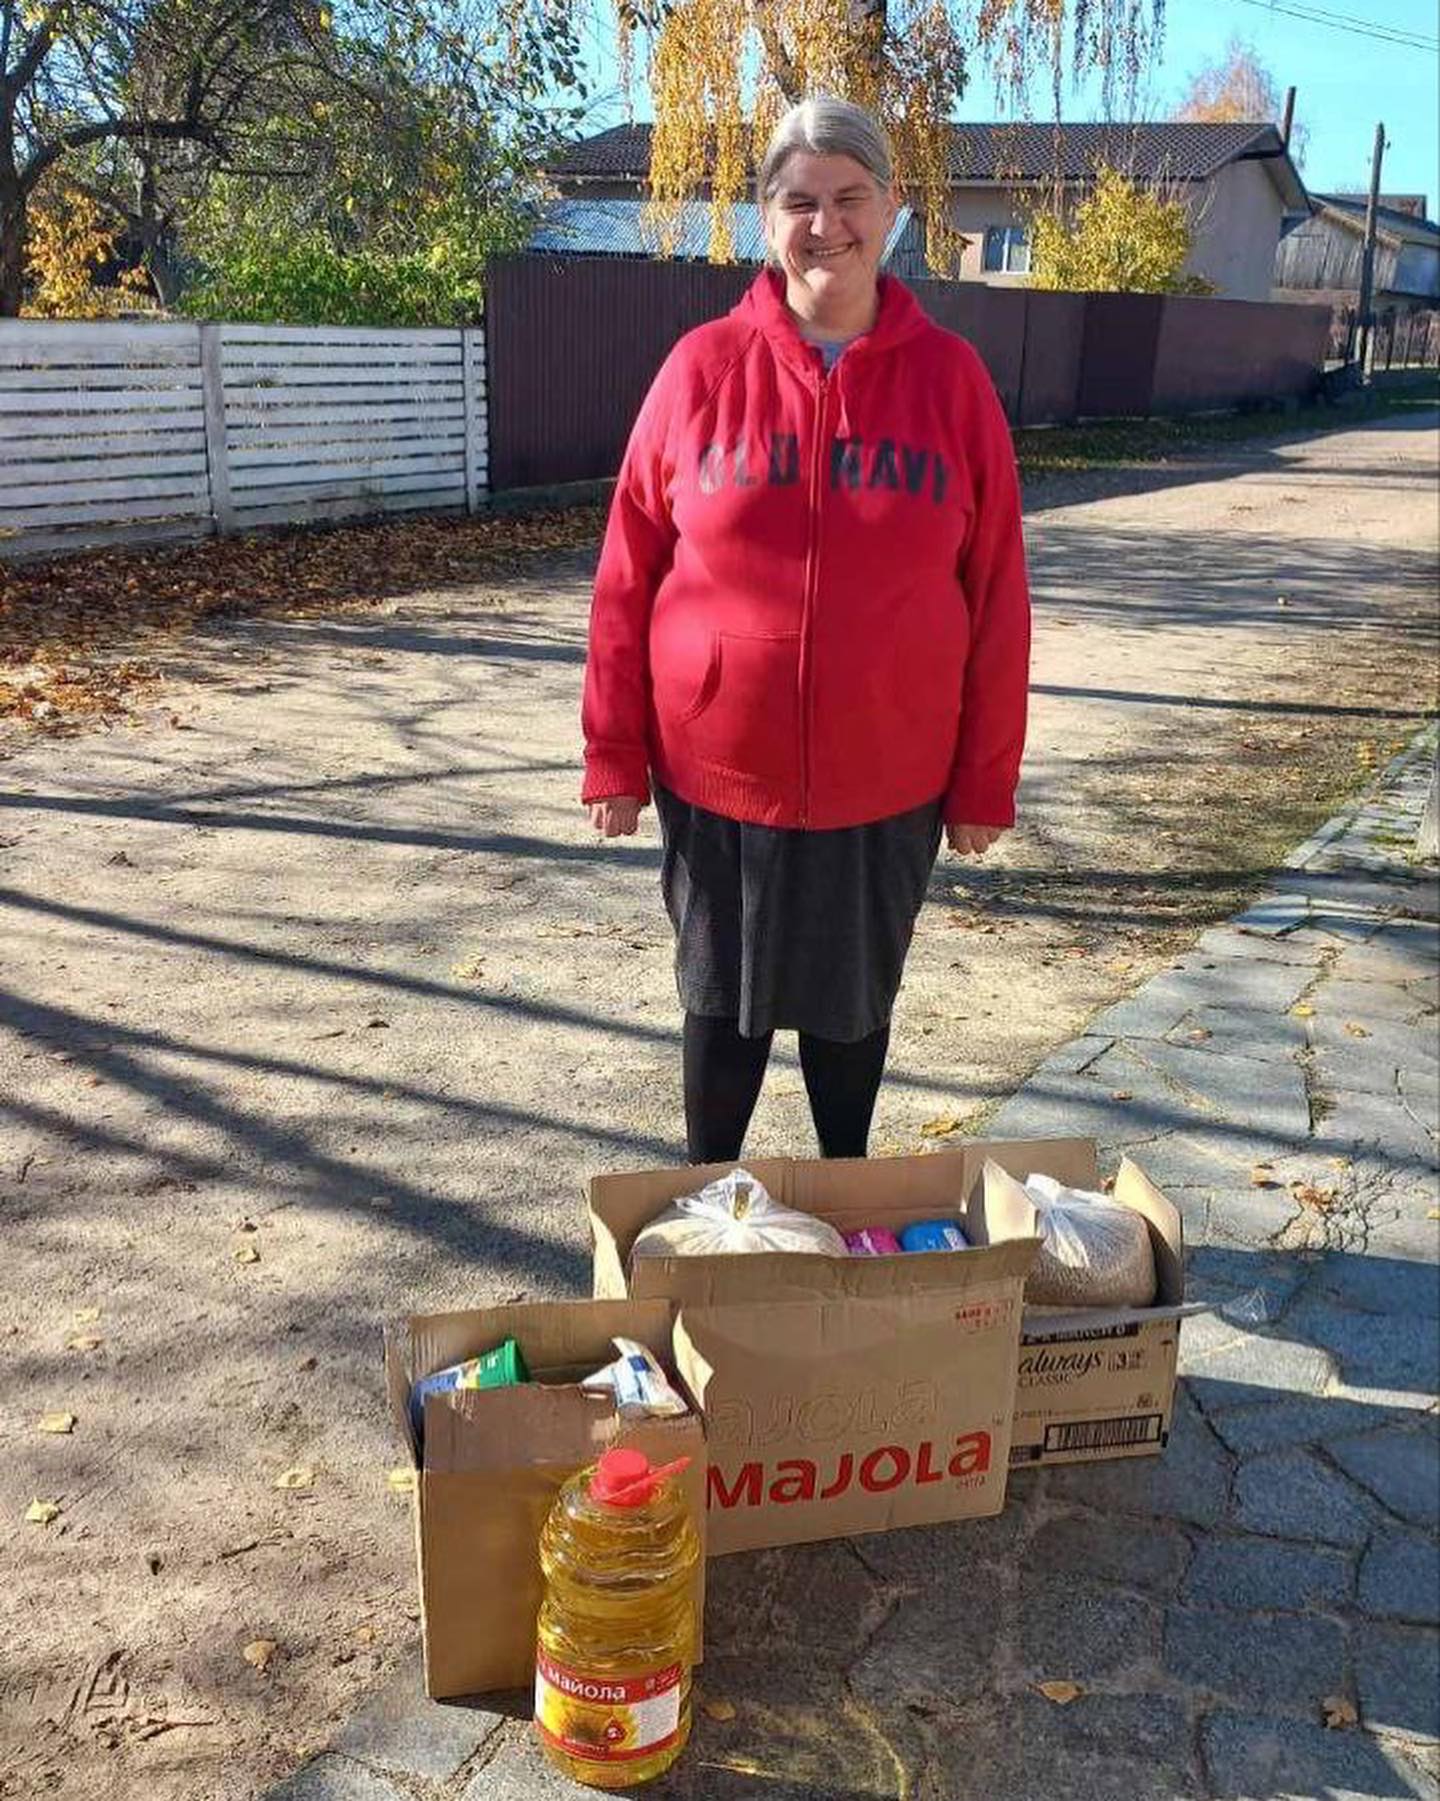 A woman in a red jacket standing next to boxes of food.